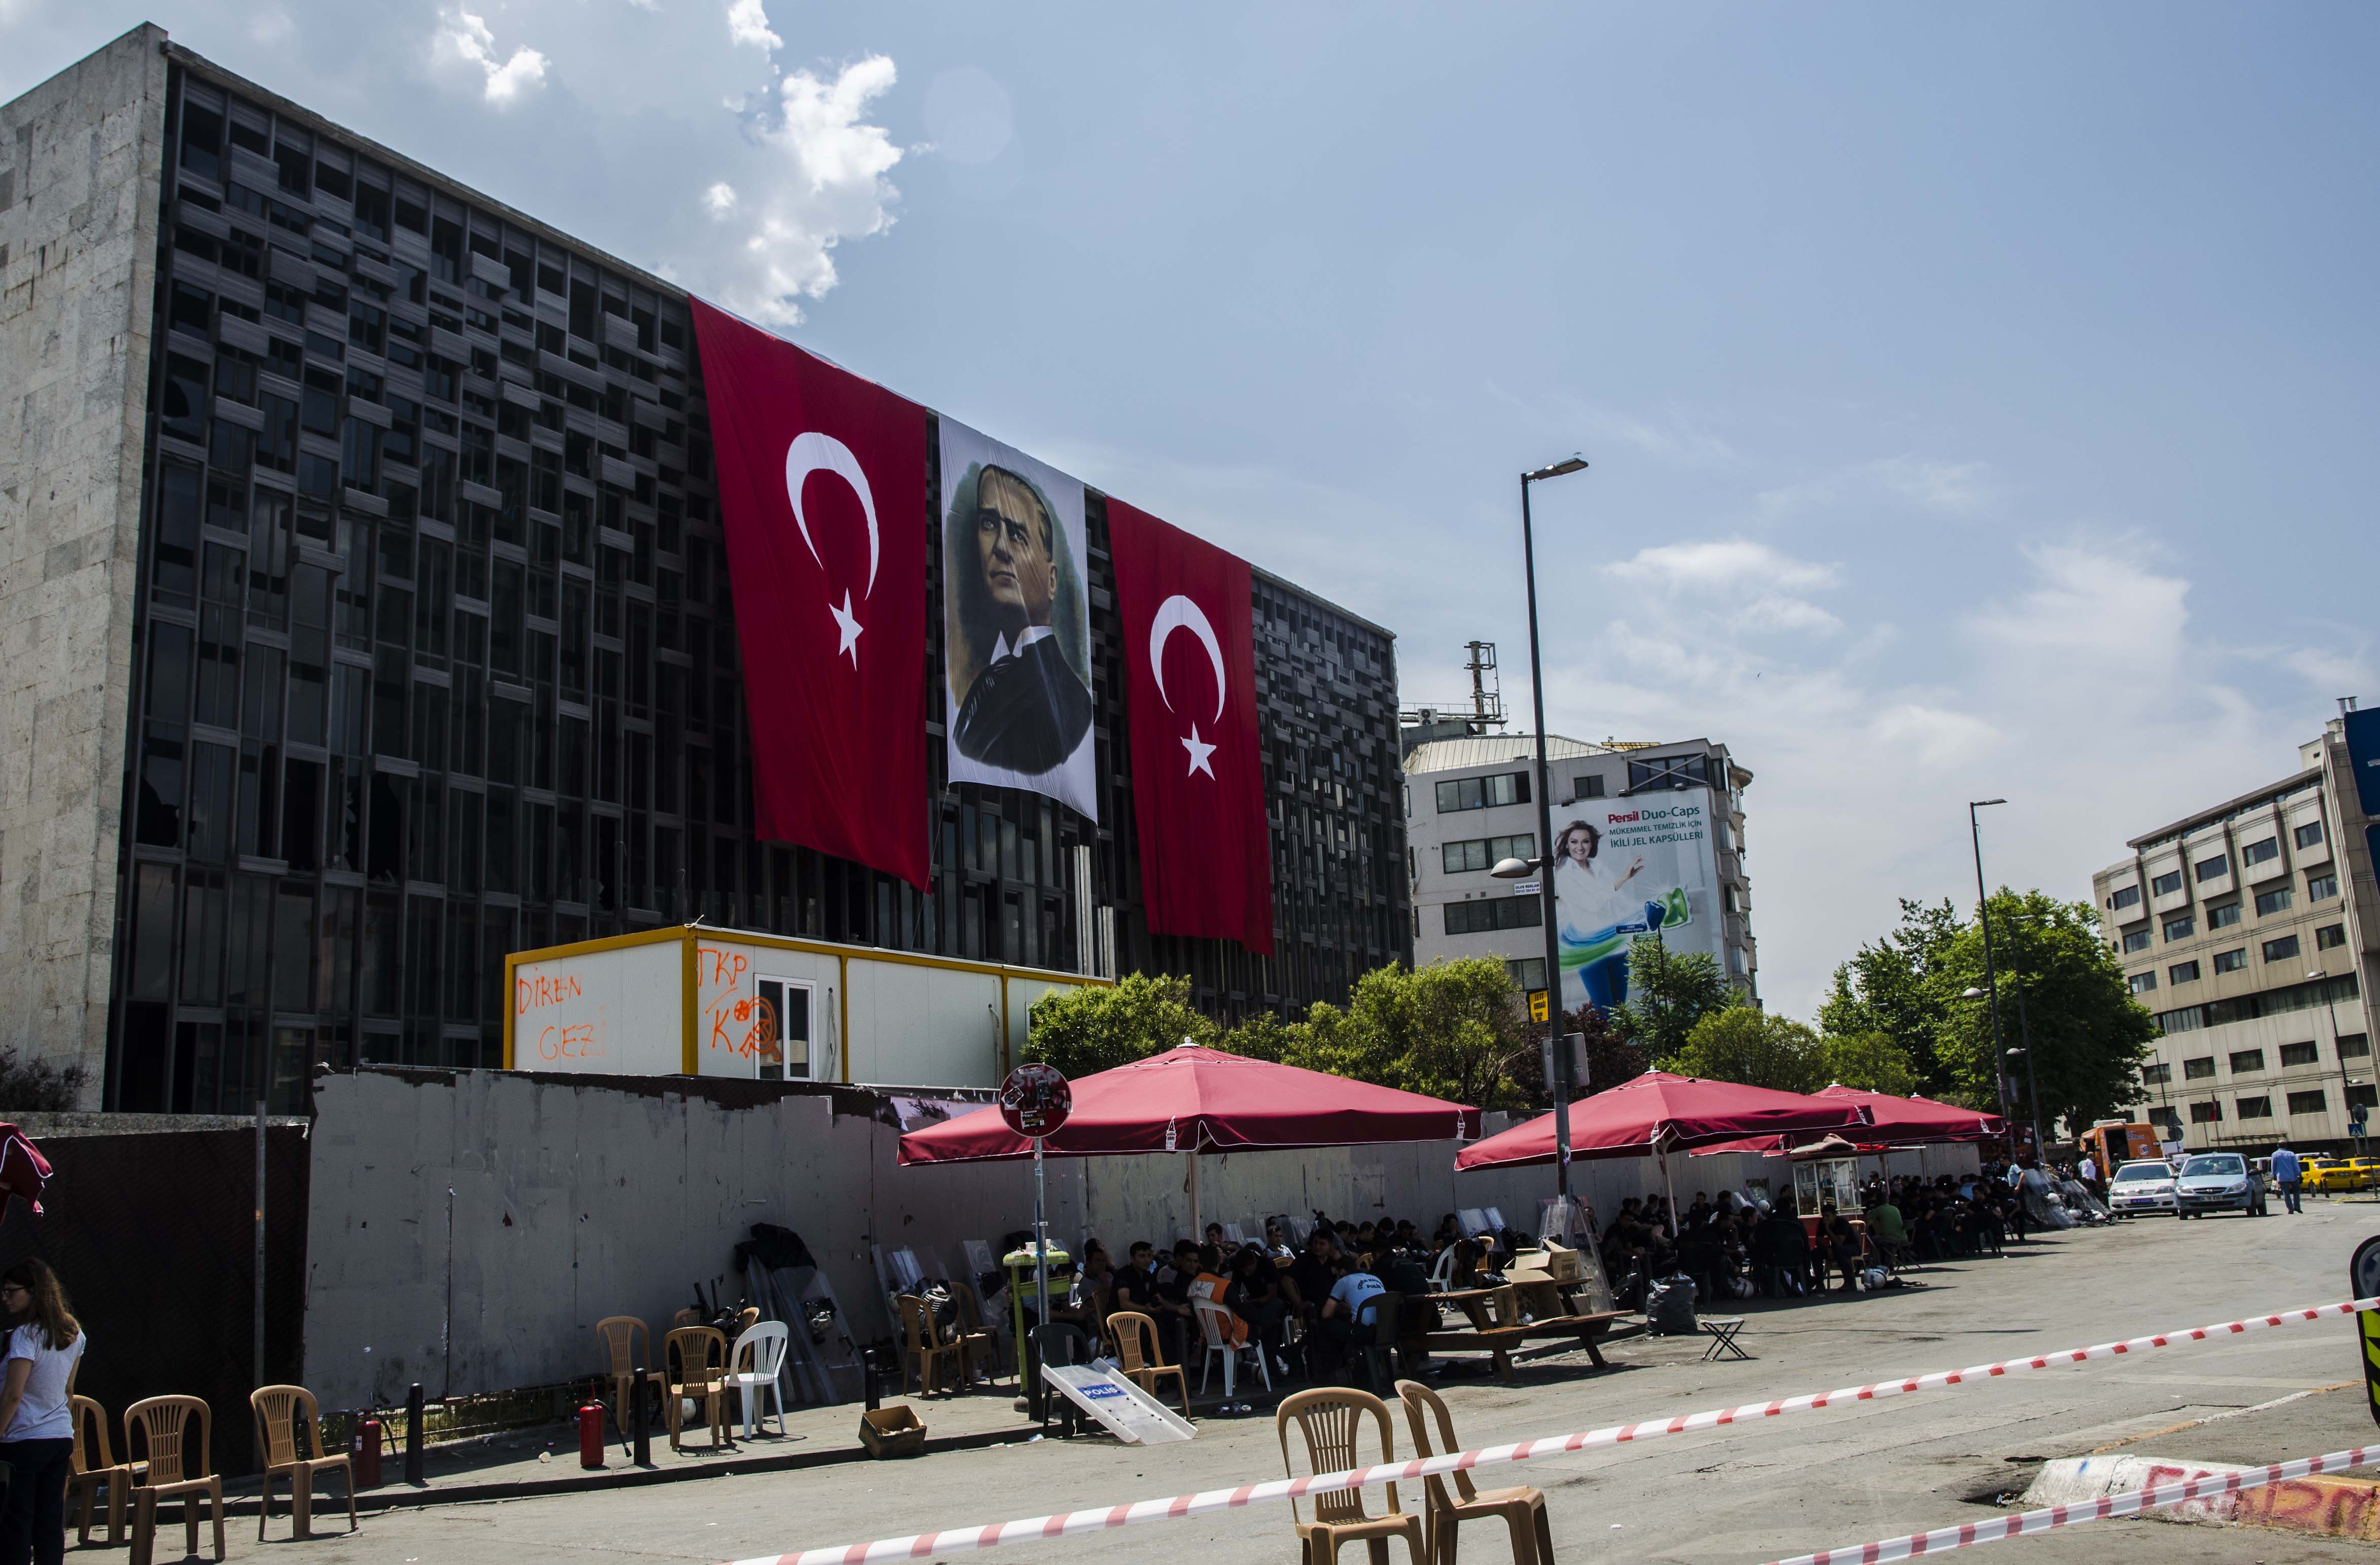 Taksim, and the culture center lost his coloreful flags